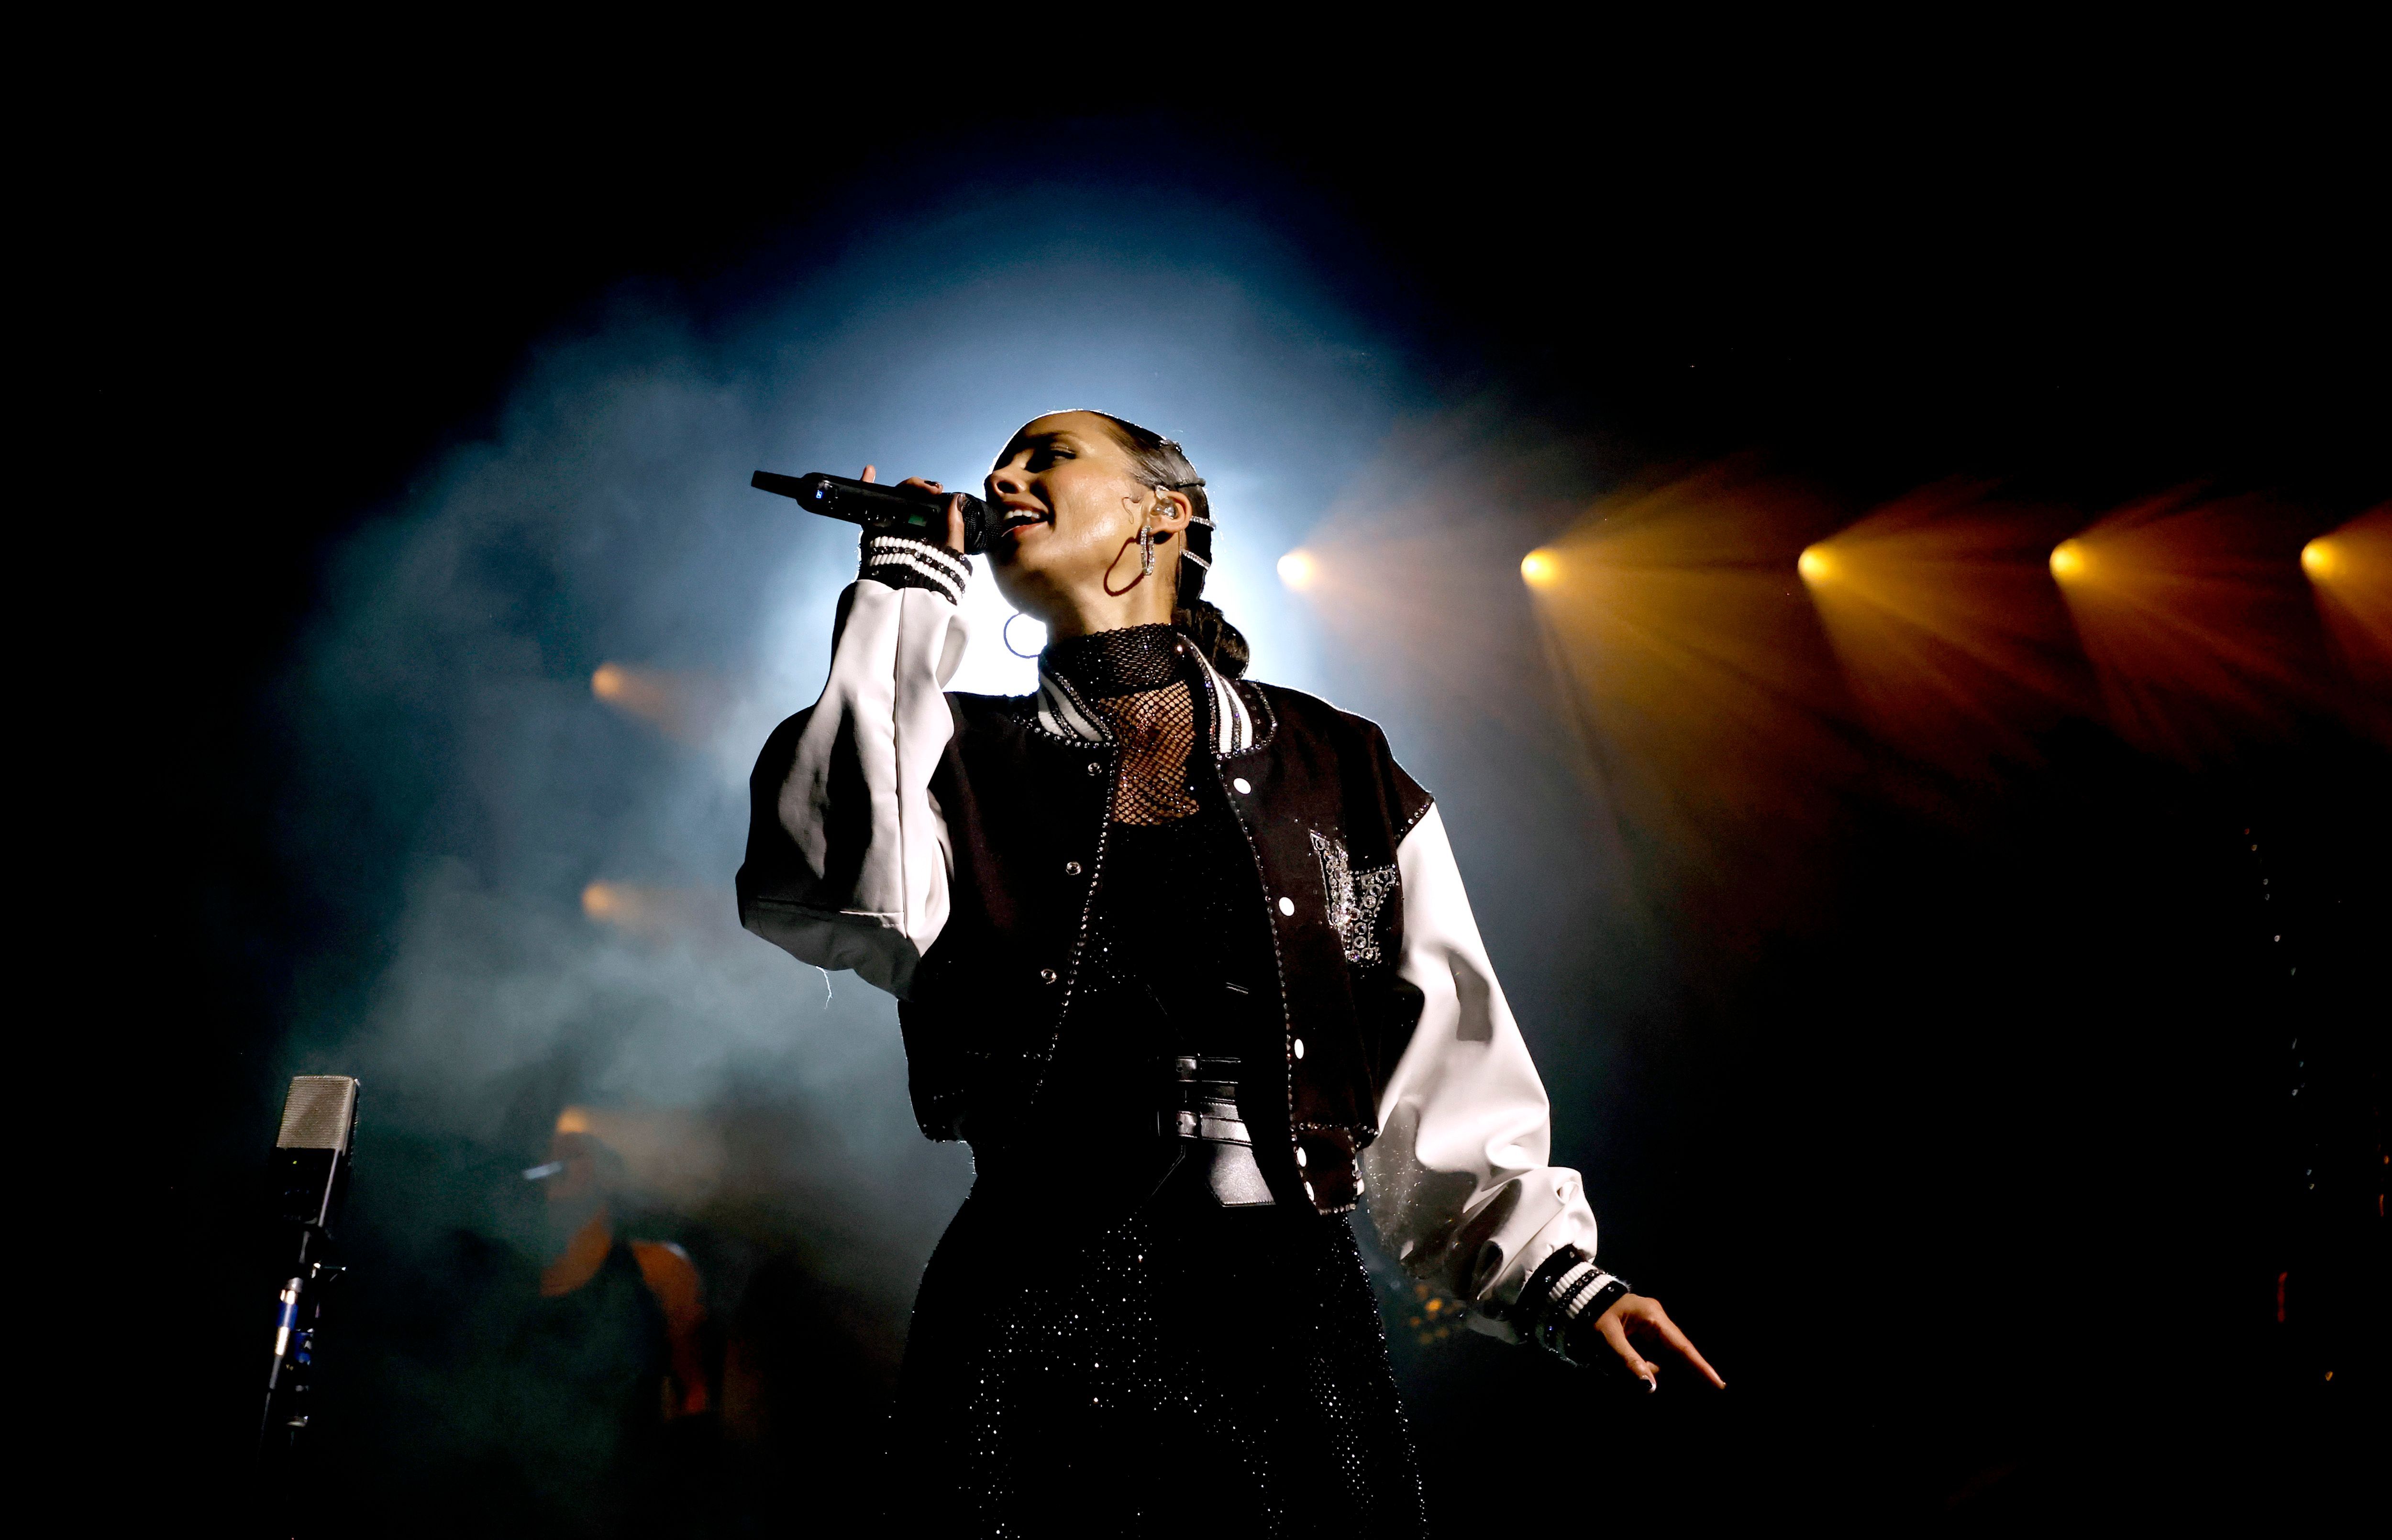 Alicia Keys sings while wearing a black-and-white lettermen jacket